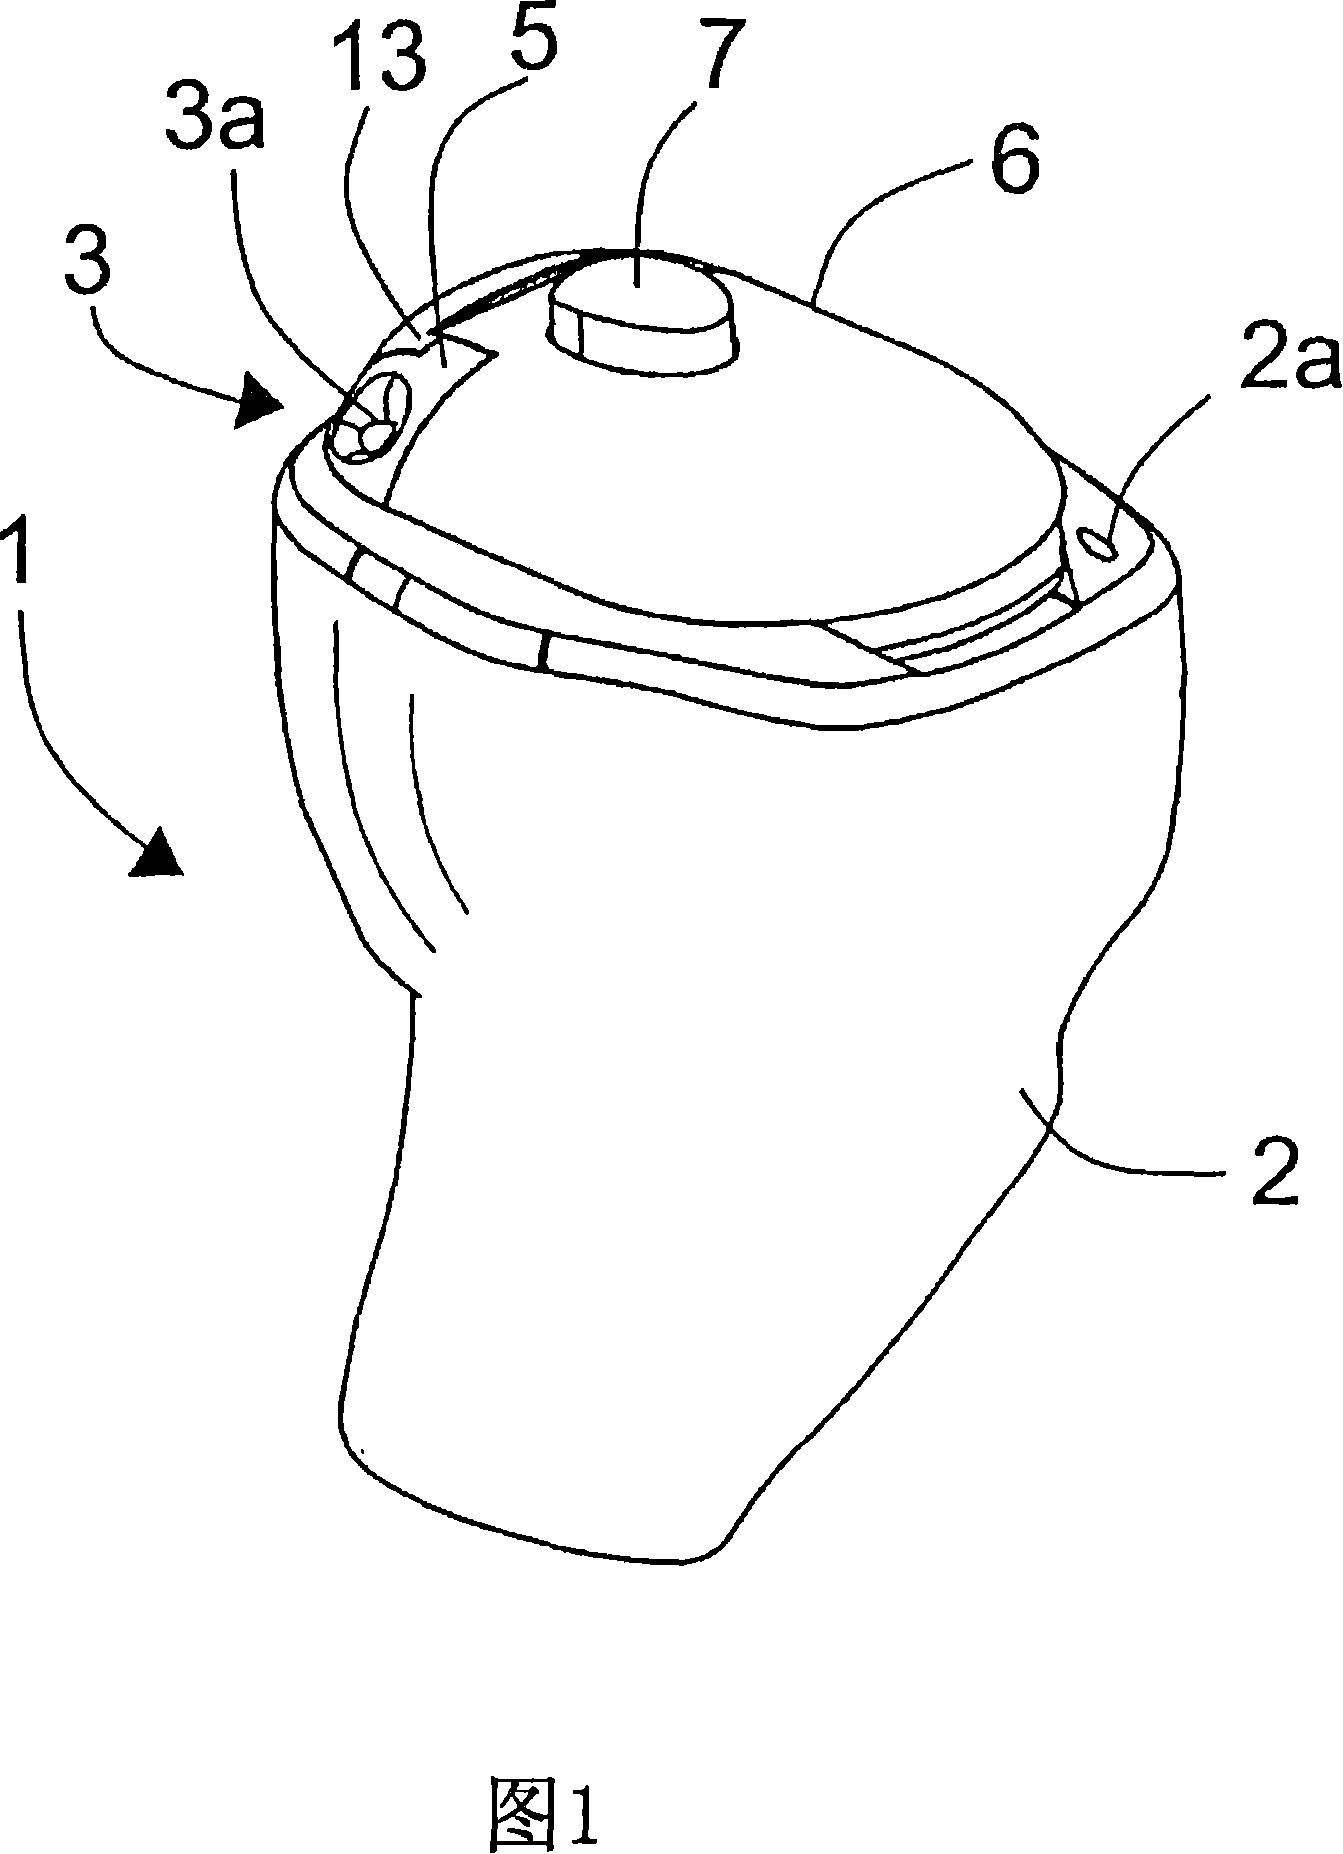 Hinge device used for hearing aid